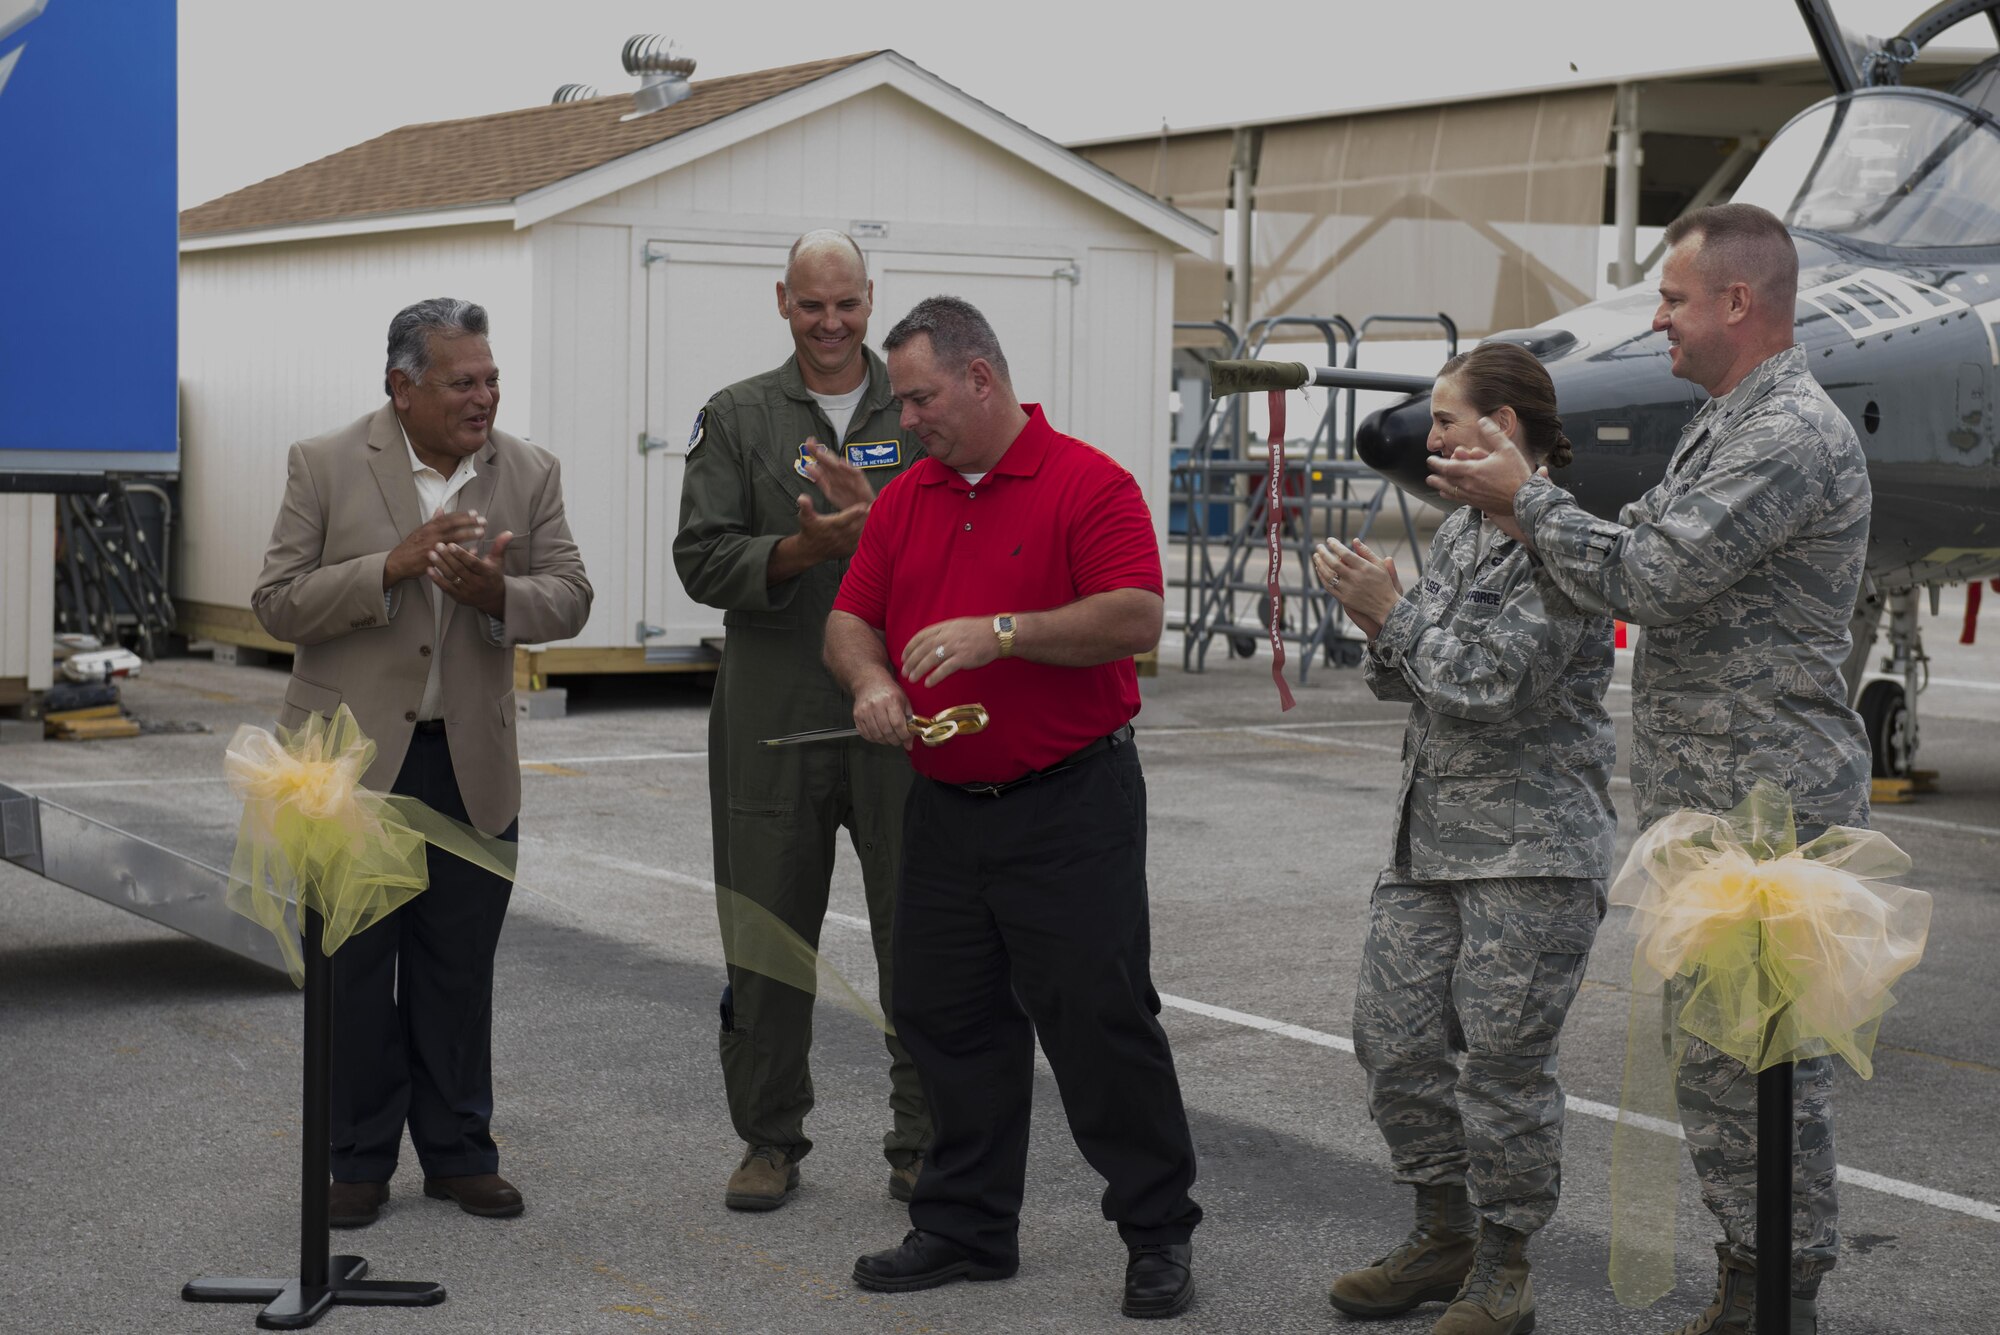 Robert Lewin, 575th Aircraft Maintenance Squadron director, cuts the ribbon at the unveiling ceremony of the first T-38 from the Pacer Classic III structural-modification program July 31, 2015, at Joint Base San Antonio-Randolph, Texas. Pacer Classic III is intended to ensure structural airworthiness of 150 T-38C aircraft and maintain T-38C fleet viability until 2029 and provides a bridge to the Air Force’s future trainer aircraft. (U.S. Air Force photo by Airman 1st Class Stormy Archer)